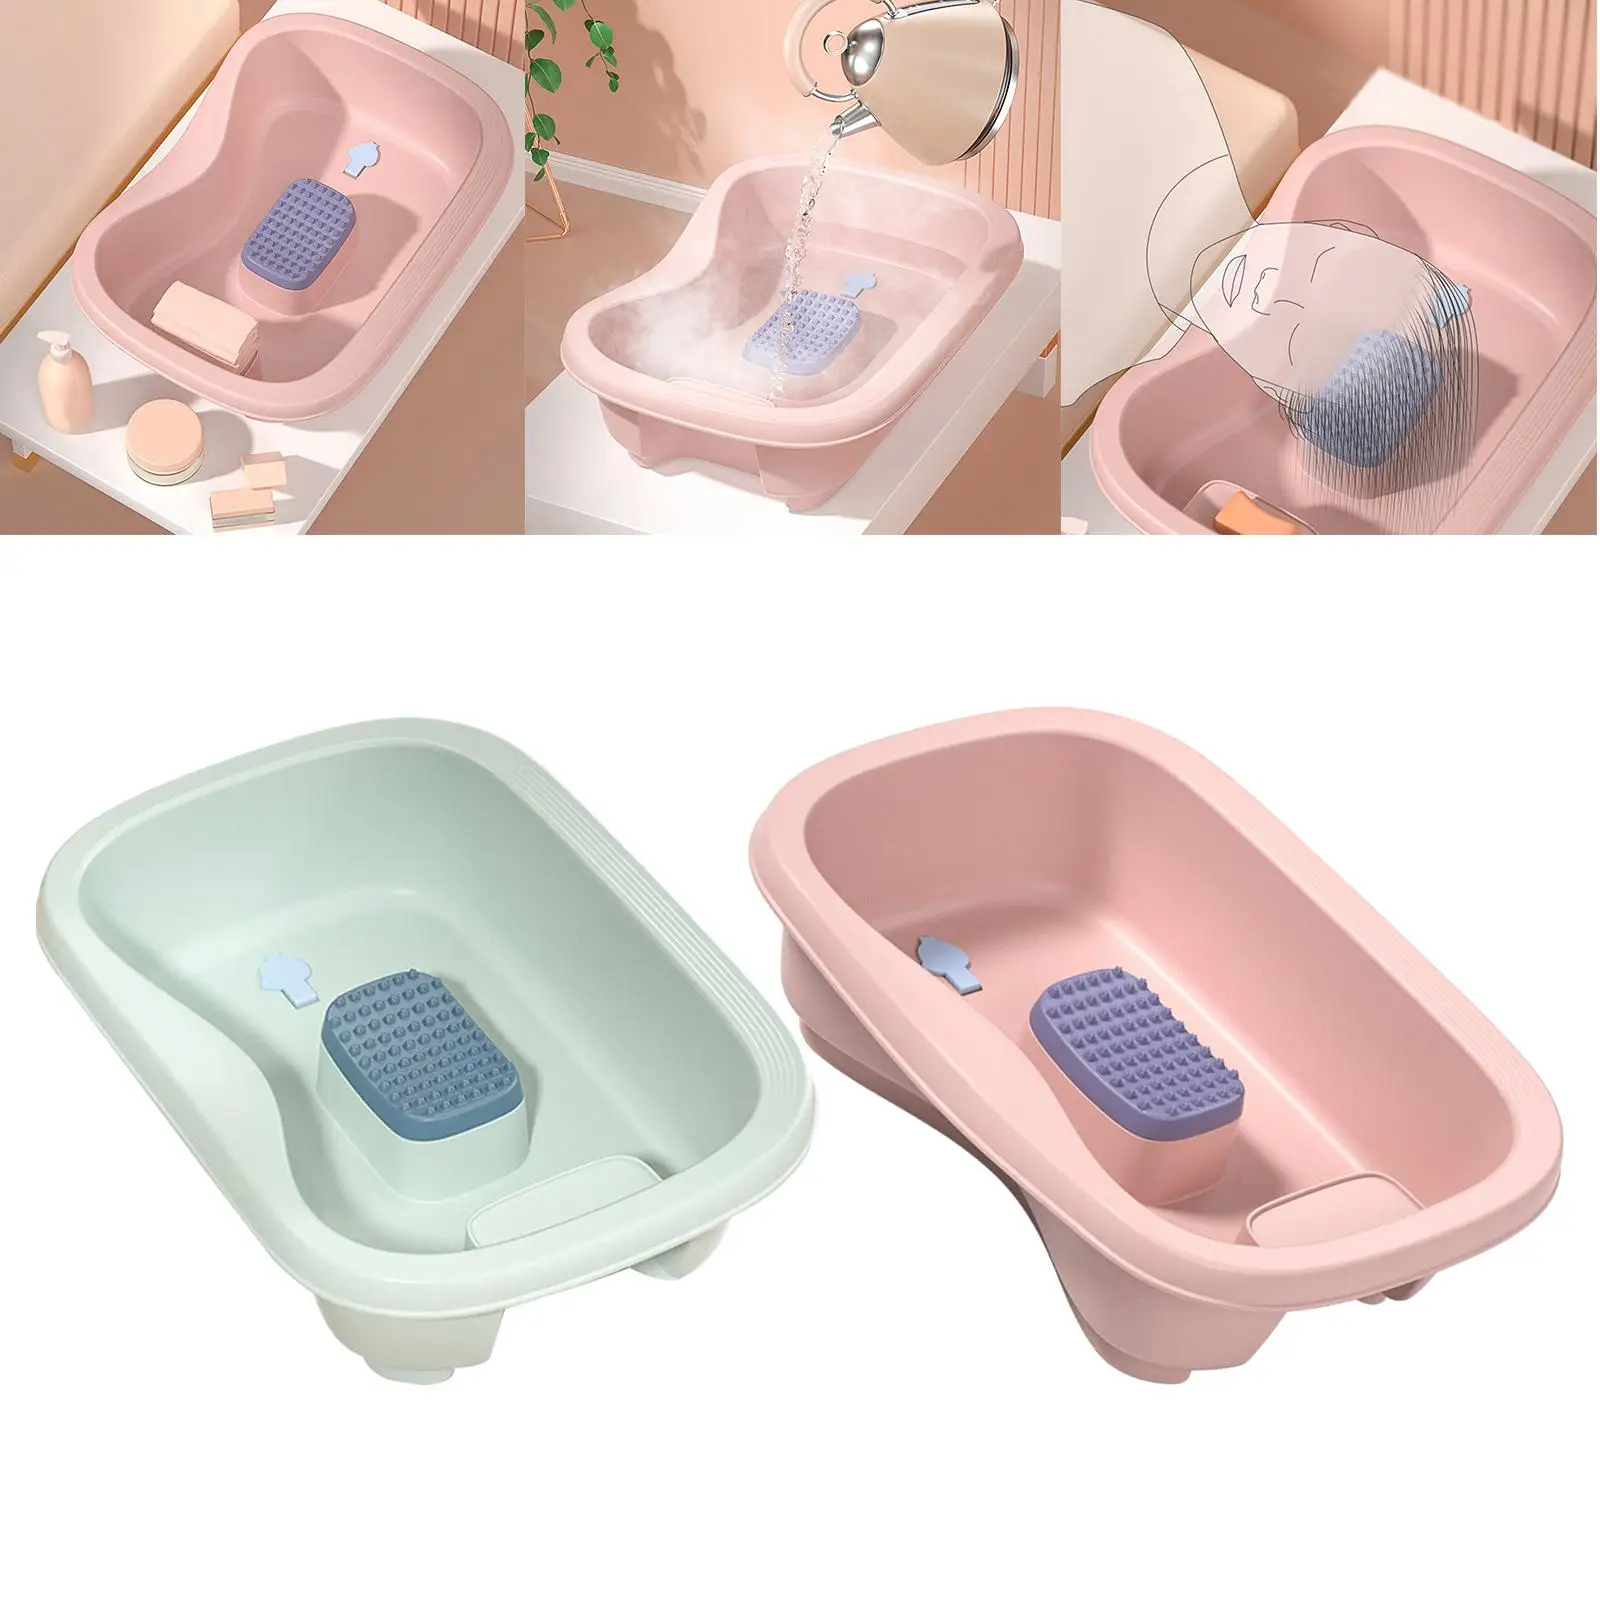 Portable Bed Shampoo Basin Comfortable  Tray Bowl Hair Washing Sink Mobile Shower for Hair Washing SPA Disabled Pregnant